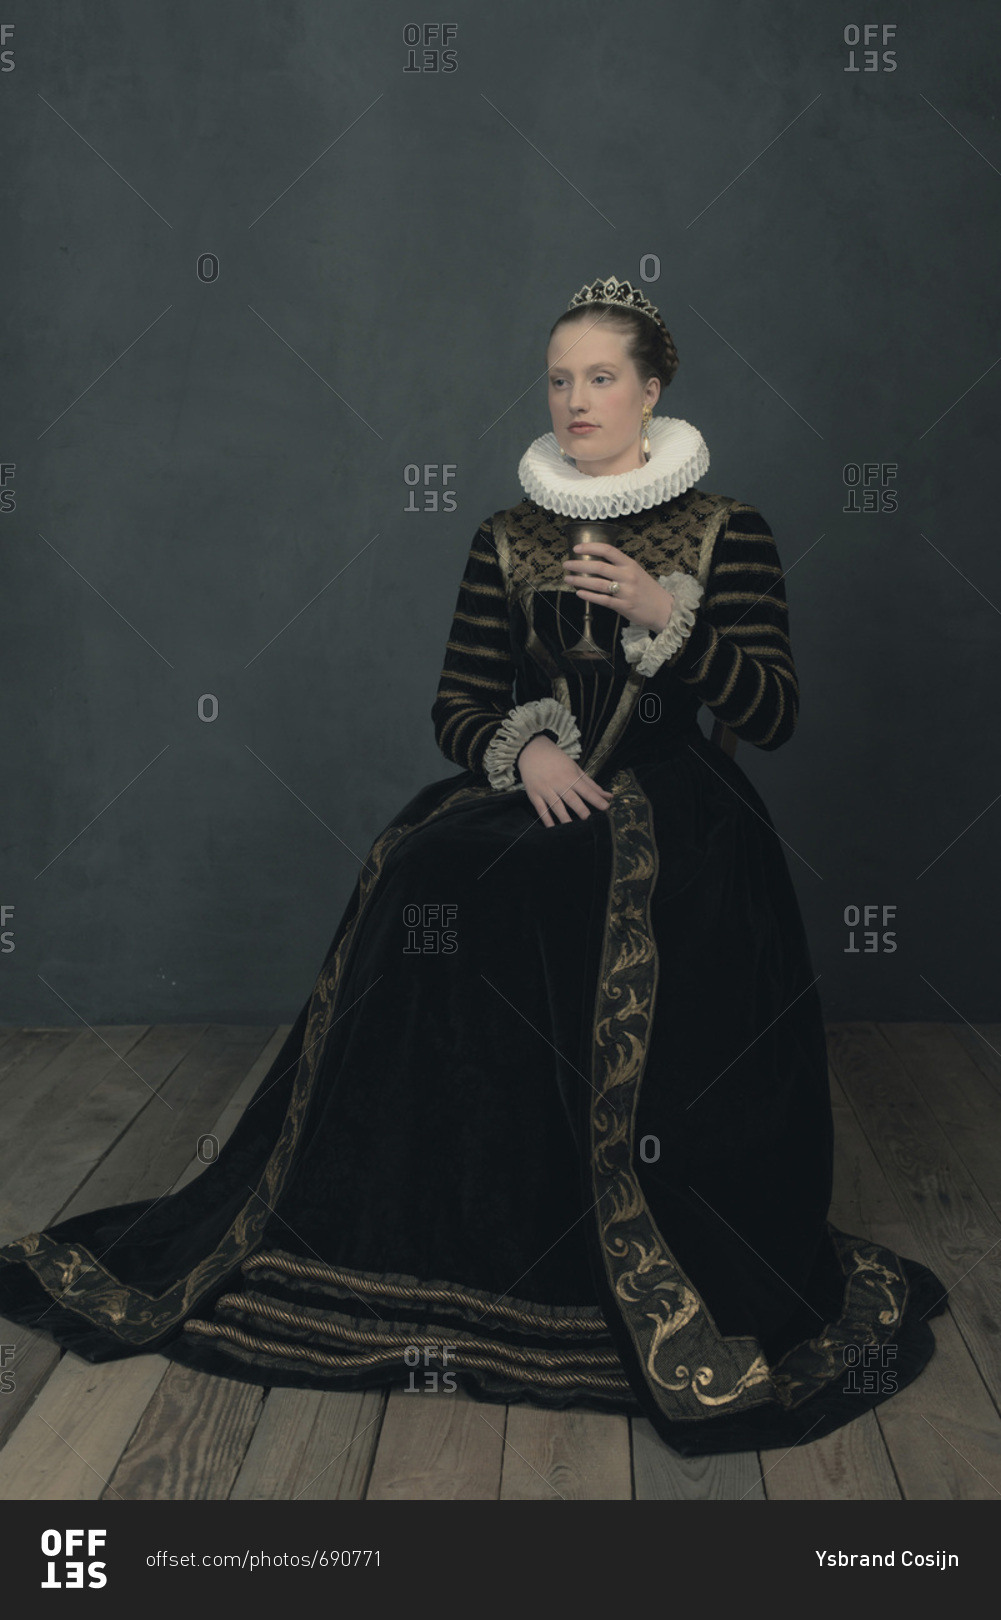 Historic duchess in black dress and white ruff sitting with goblet.